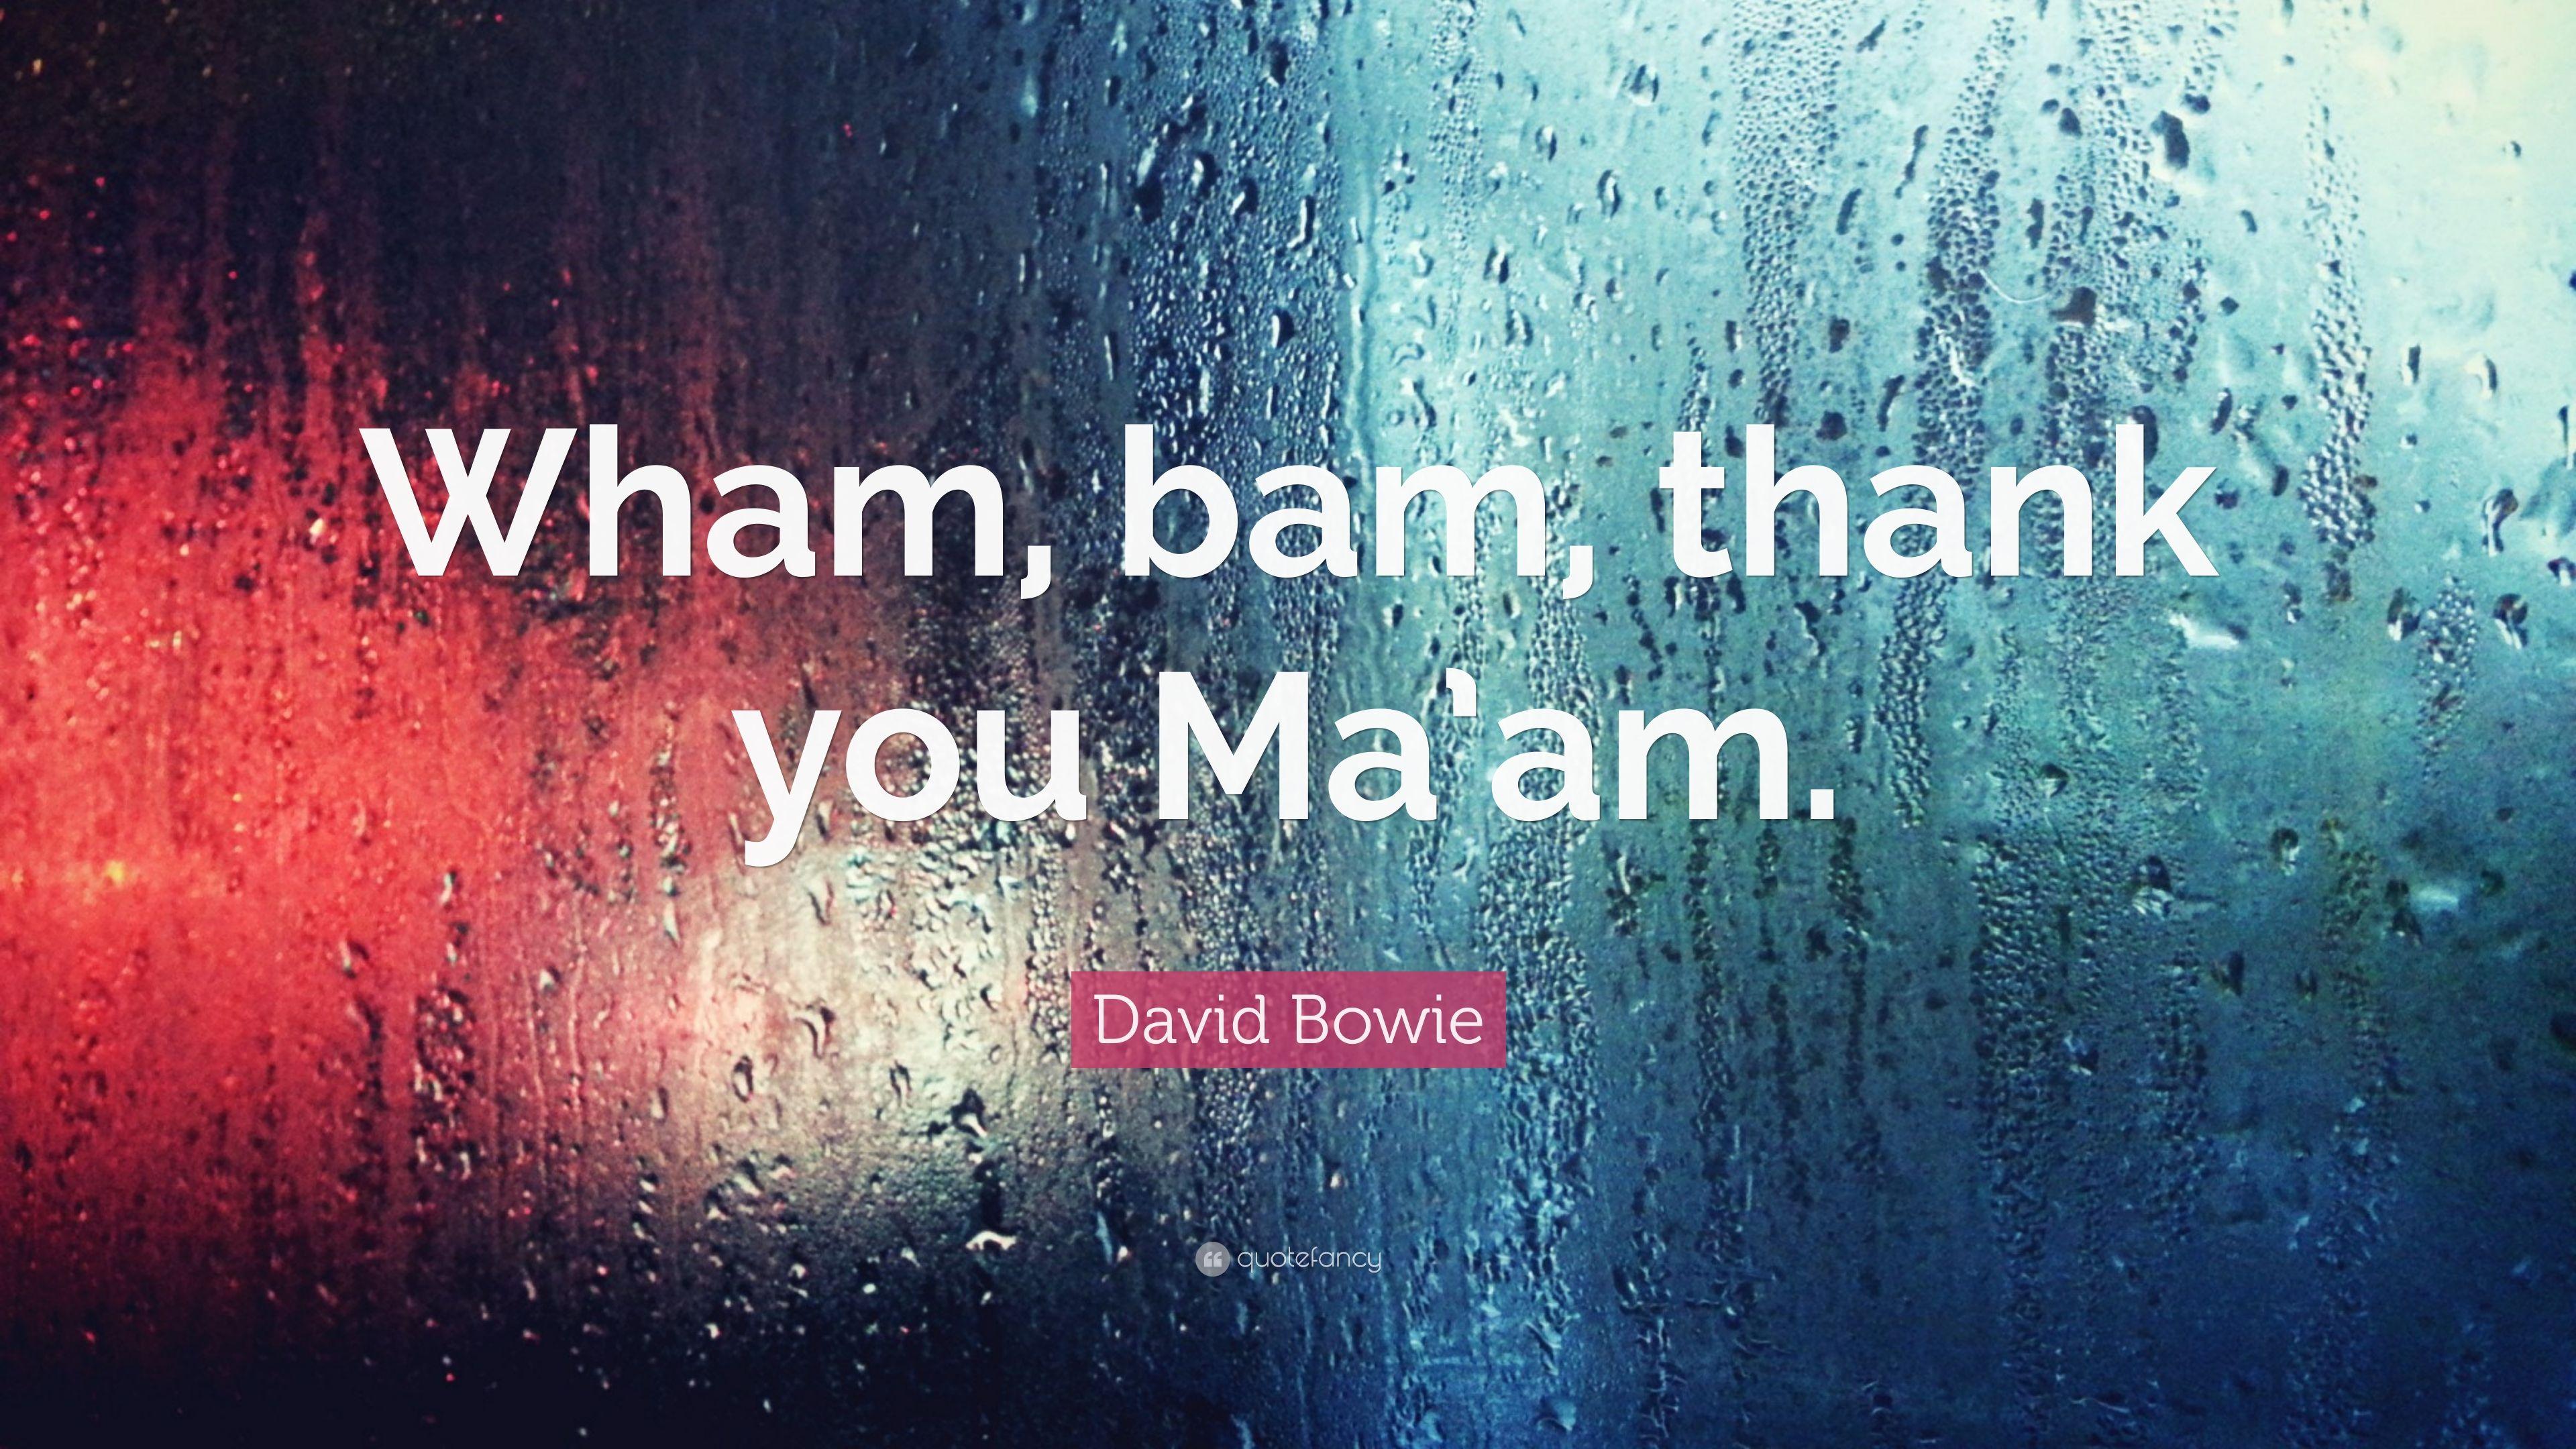 David Bowie Quote: “Wham, bam, thank you Ma'am.” 7 wallpaper